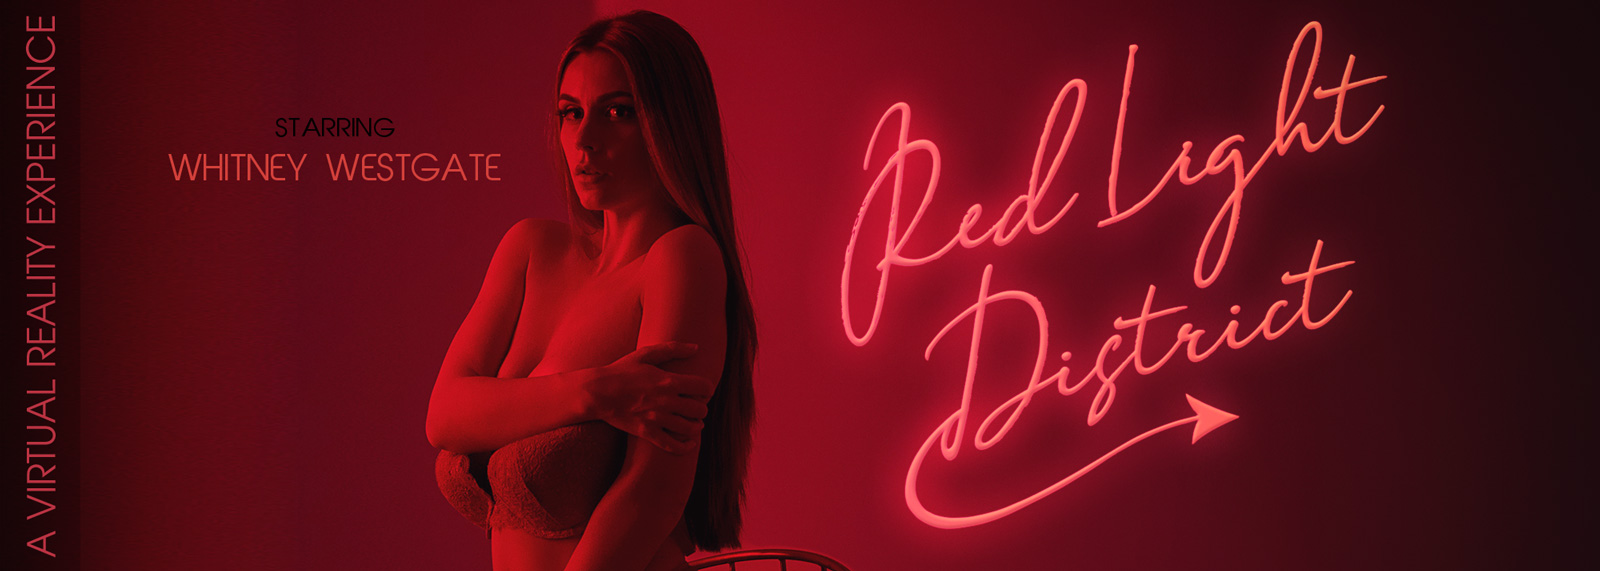 Red Light District with Whitney Westgate  Slideshow